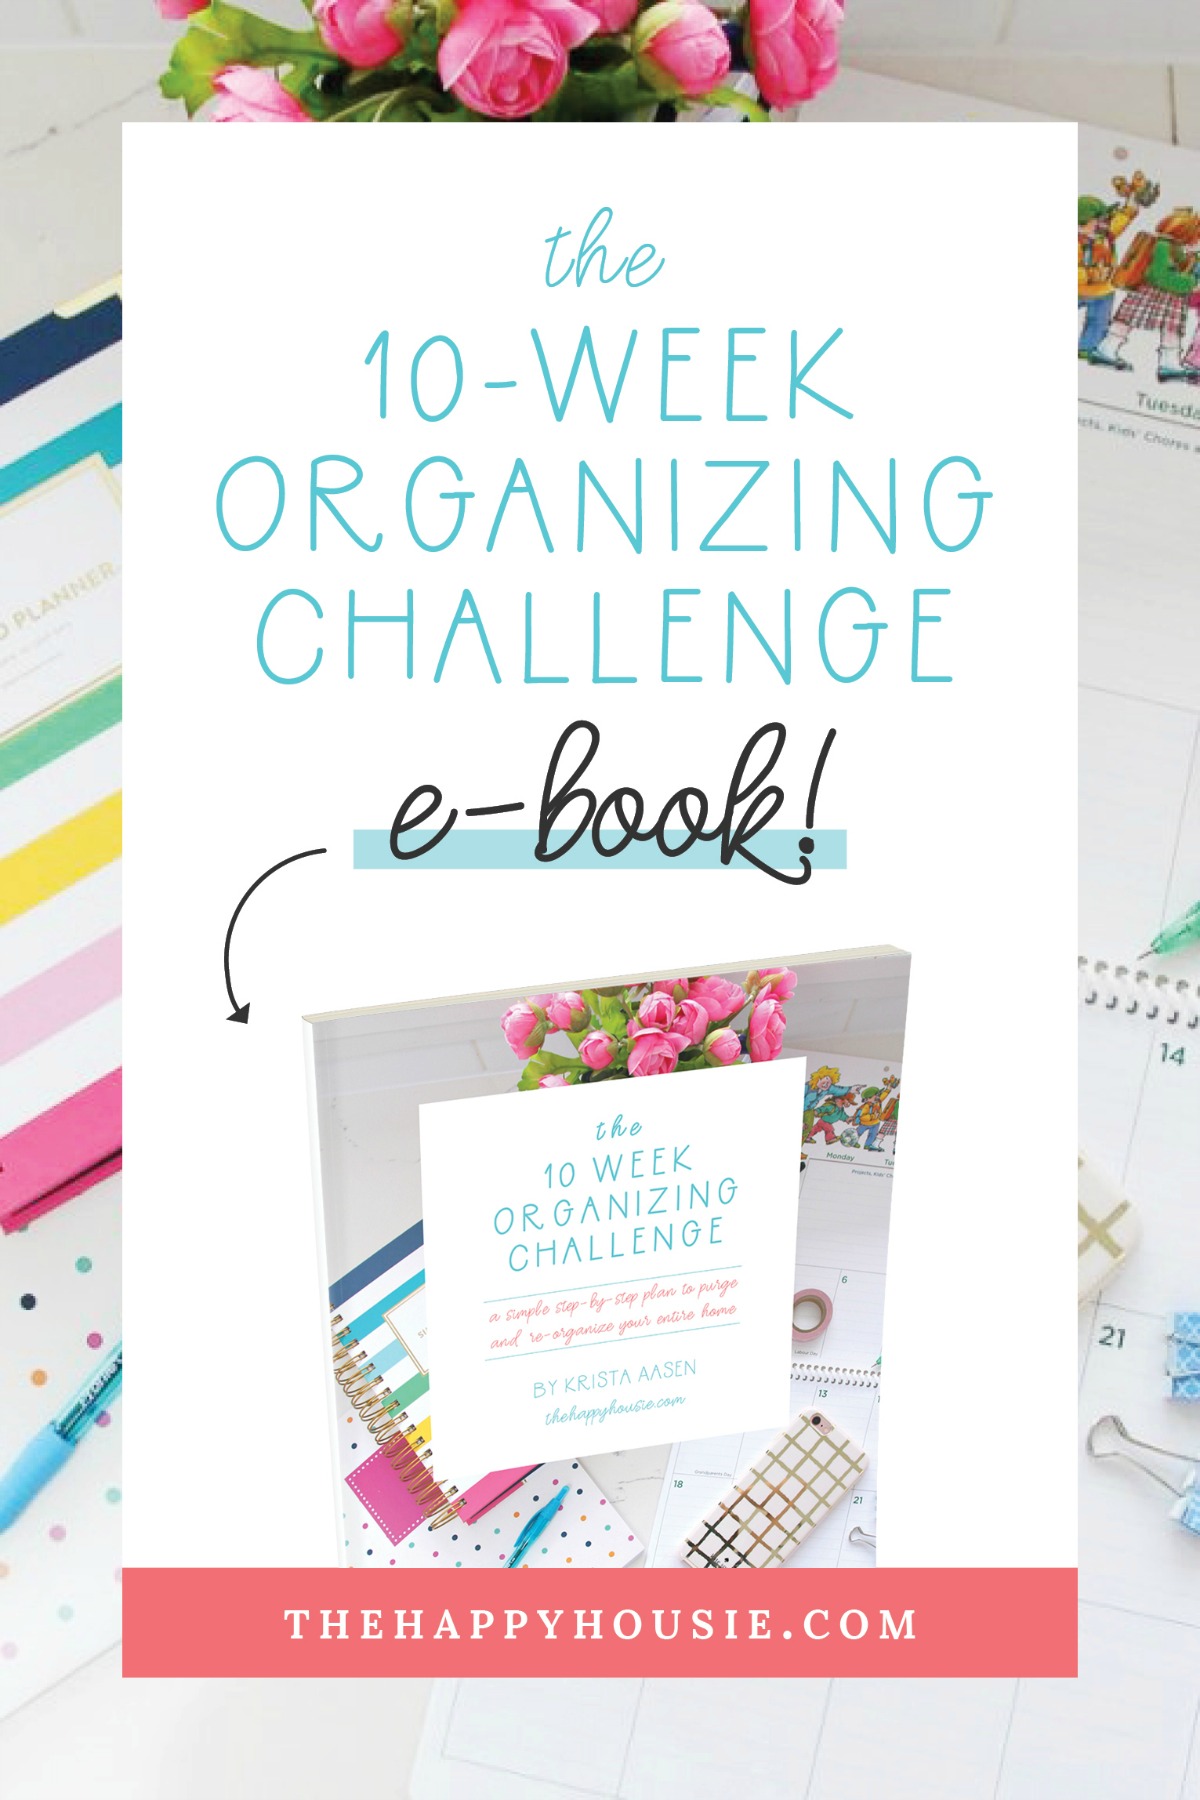 The 10-Week Organizing Challenge poster.